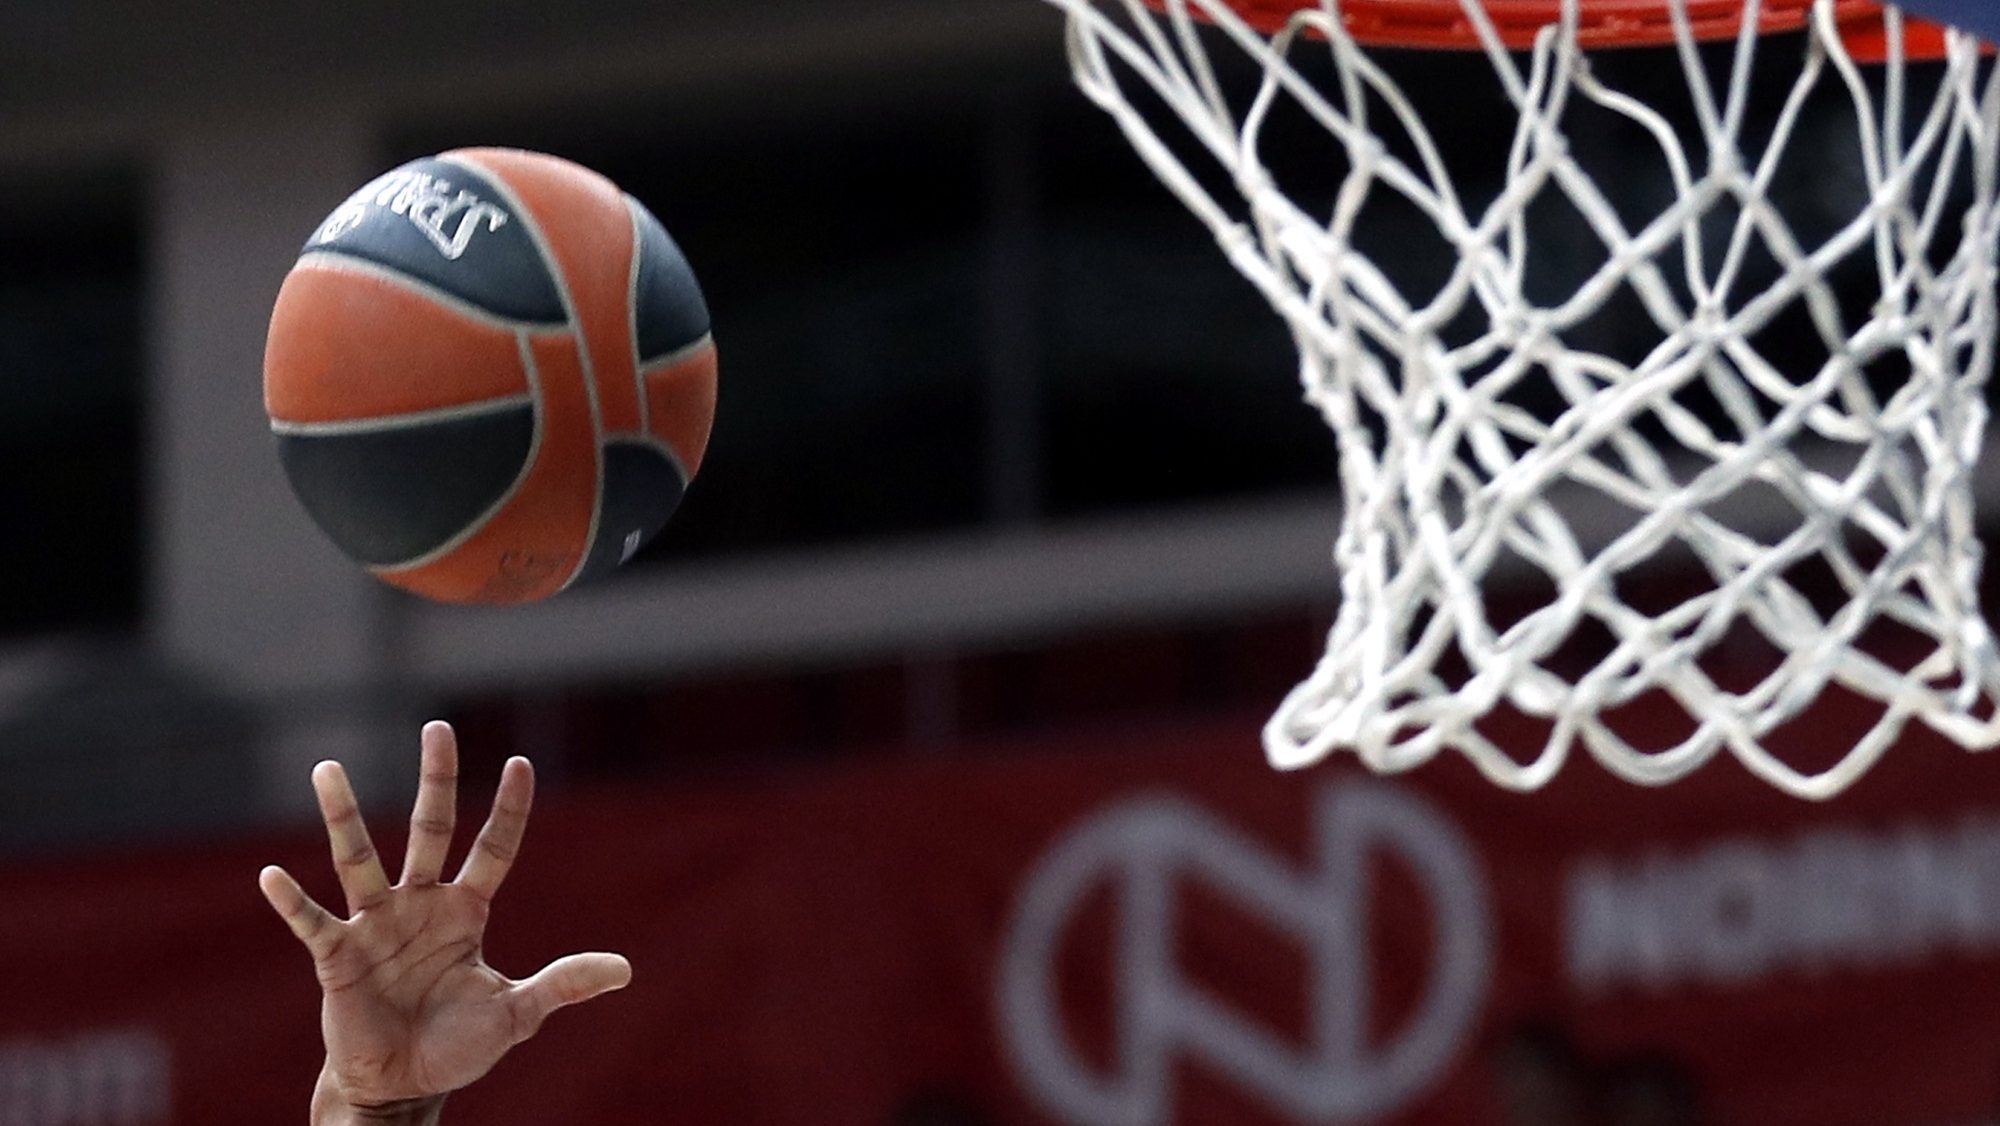 epa08443074 (FILE) - Shavon Shields of Vitoria-Gasteiz scores during the Euroleague basketball match between CSKA Moscow and Baskonia Vitoria-Gasteiz in Moscow, Russia, 04 April 2019 (re-issued on 25 May 2020). The 2019-20 Euroleague and Eurocup basketball seasons have been cancelled due to the ongoing coronavirus COVID-19 pandemic, the Euroleague Commercial Assets (ECA) Shareholders Executive Board confirmed on 25 May 2020.  EPA/SERGEI ILNITSKY *** Local Caption *** 55104369